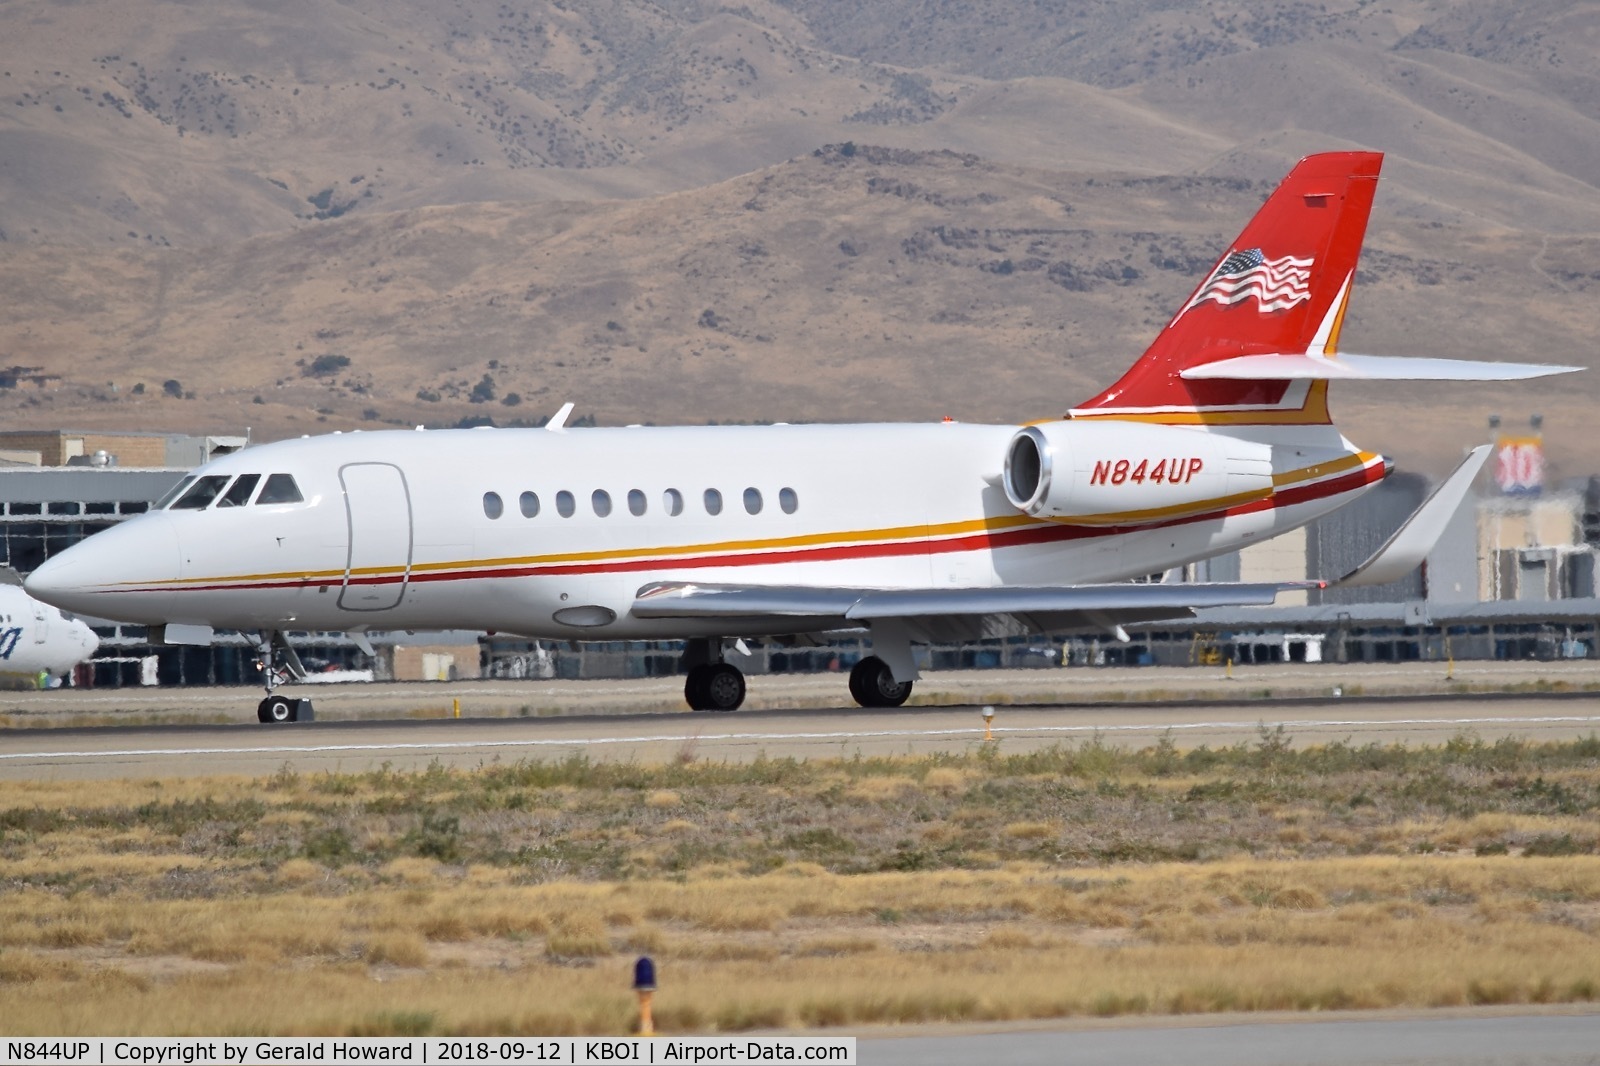 N844UP, 2001 Dassault Falcon 2000 C/N 156, Landing roll out on RWY 28L.